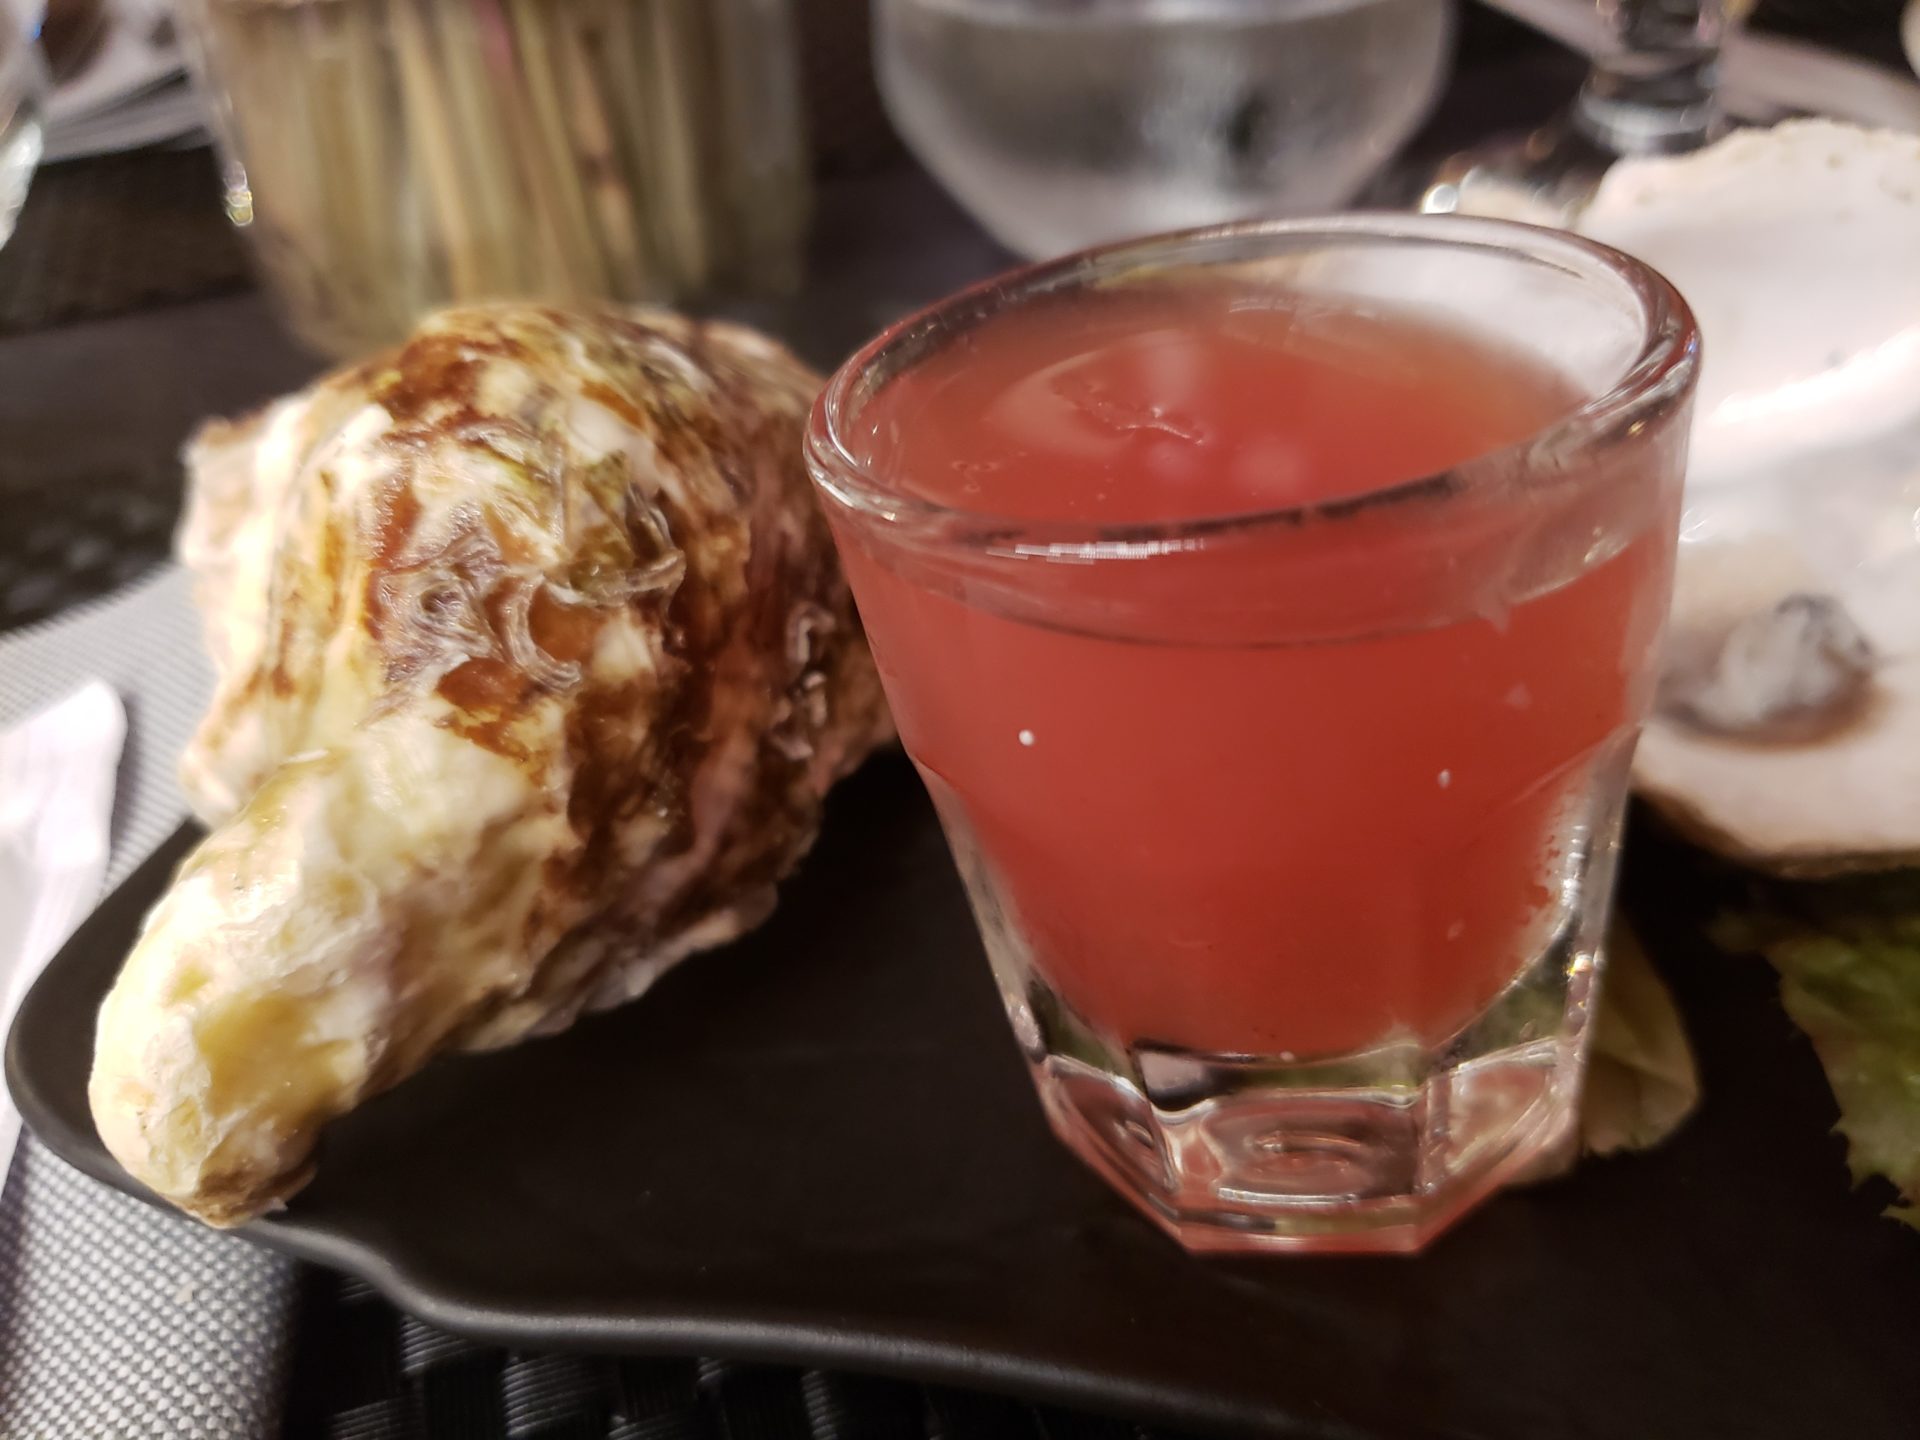 a glass of pink liquid next to a shell